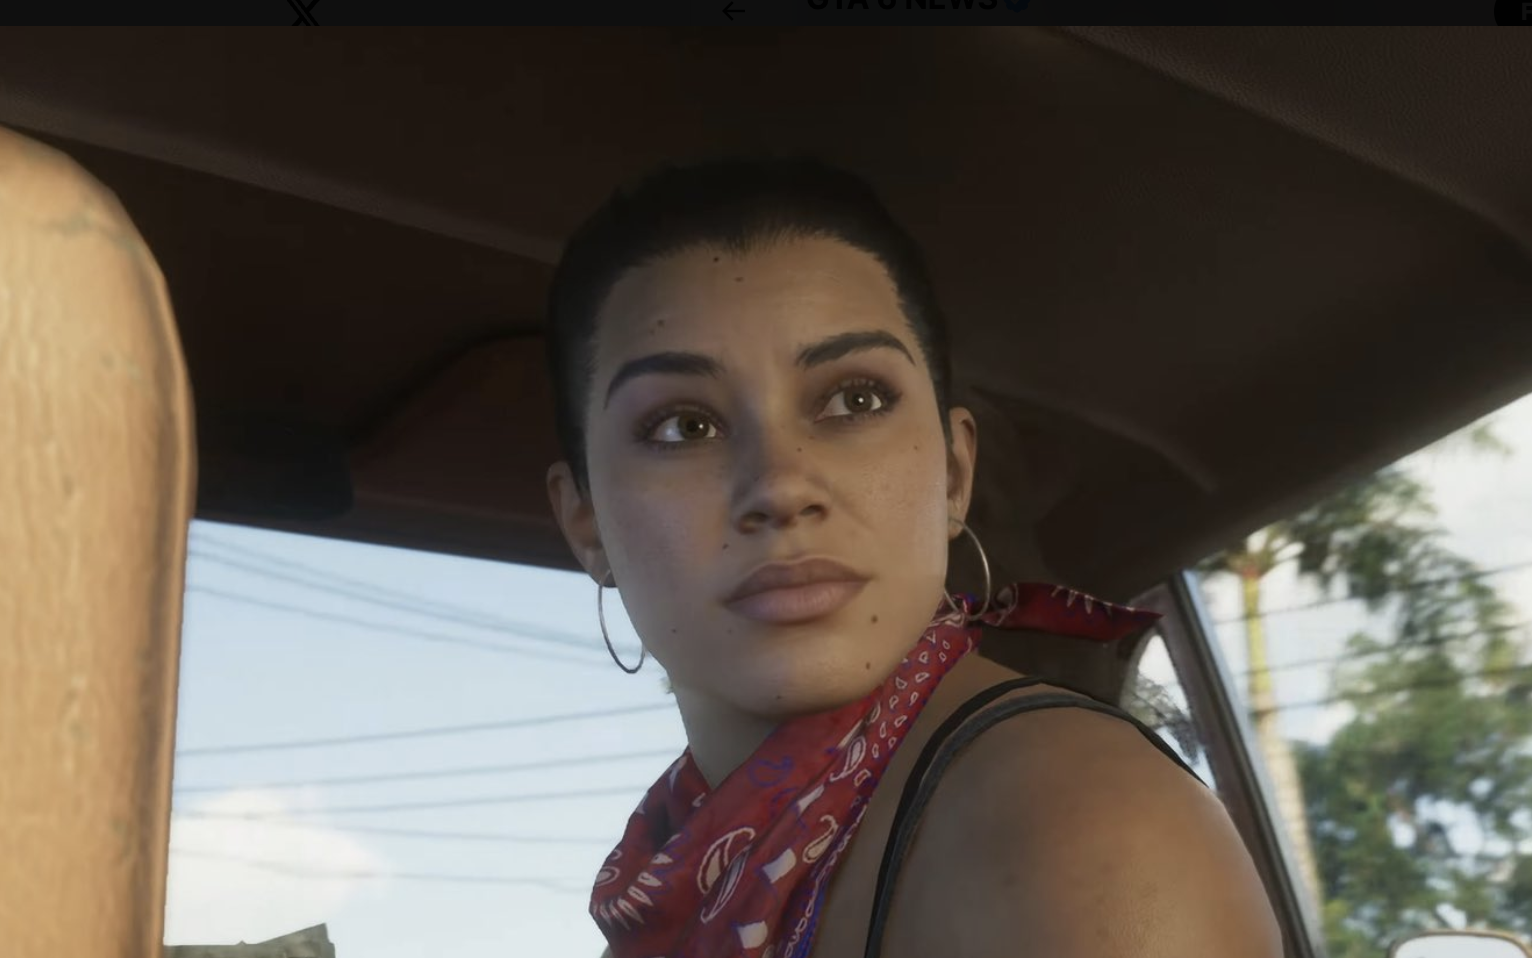 GTA 6 trailer: fast cars, flamingos and a female lead revealed in first  look, Grand Theft Auto VI